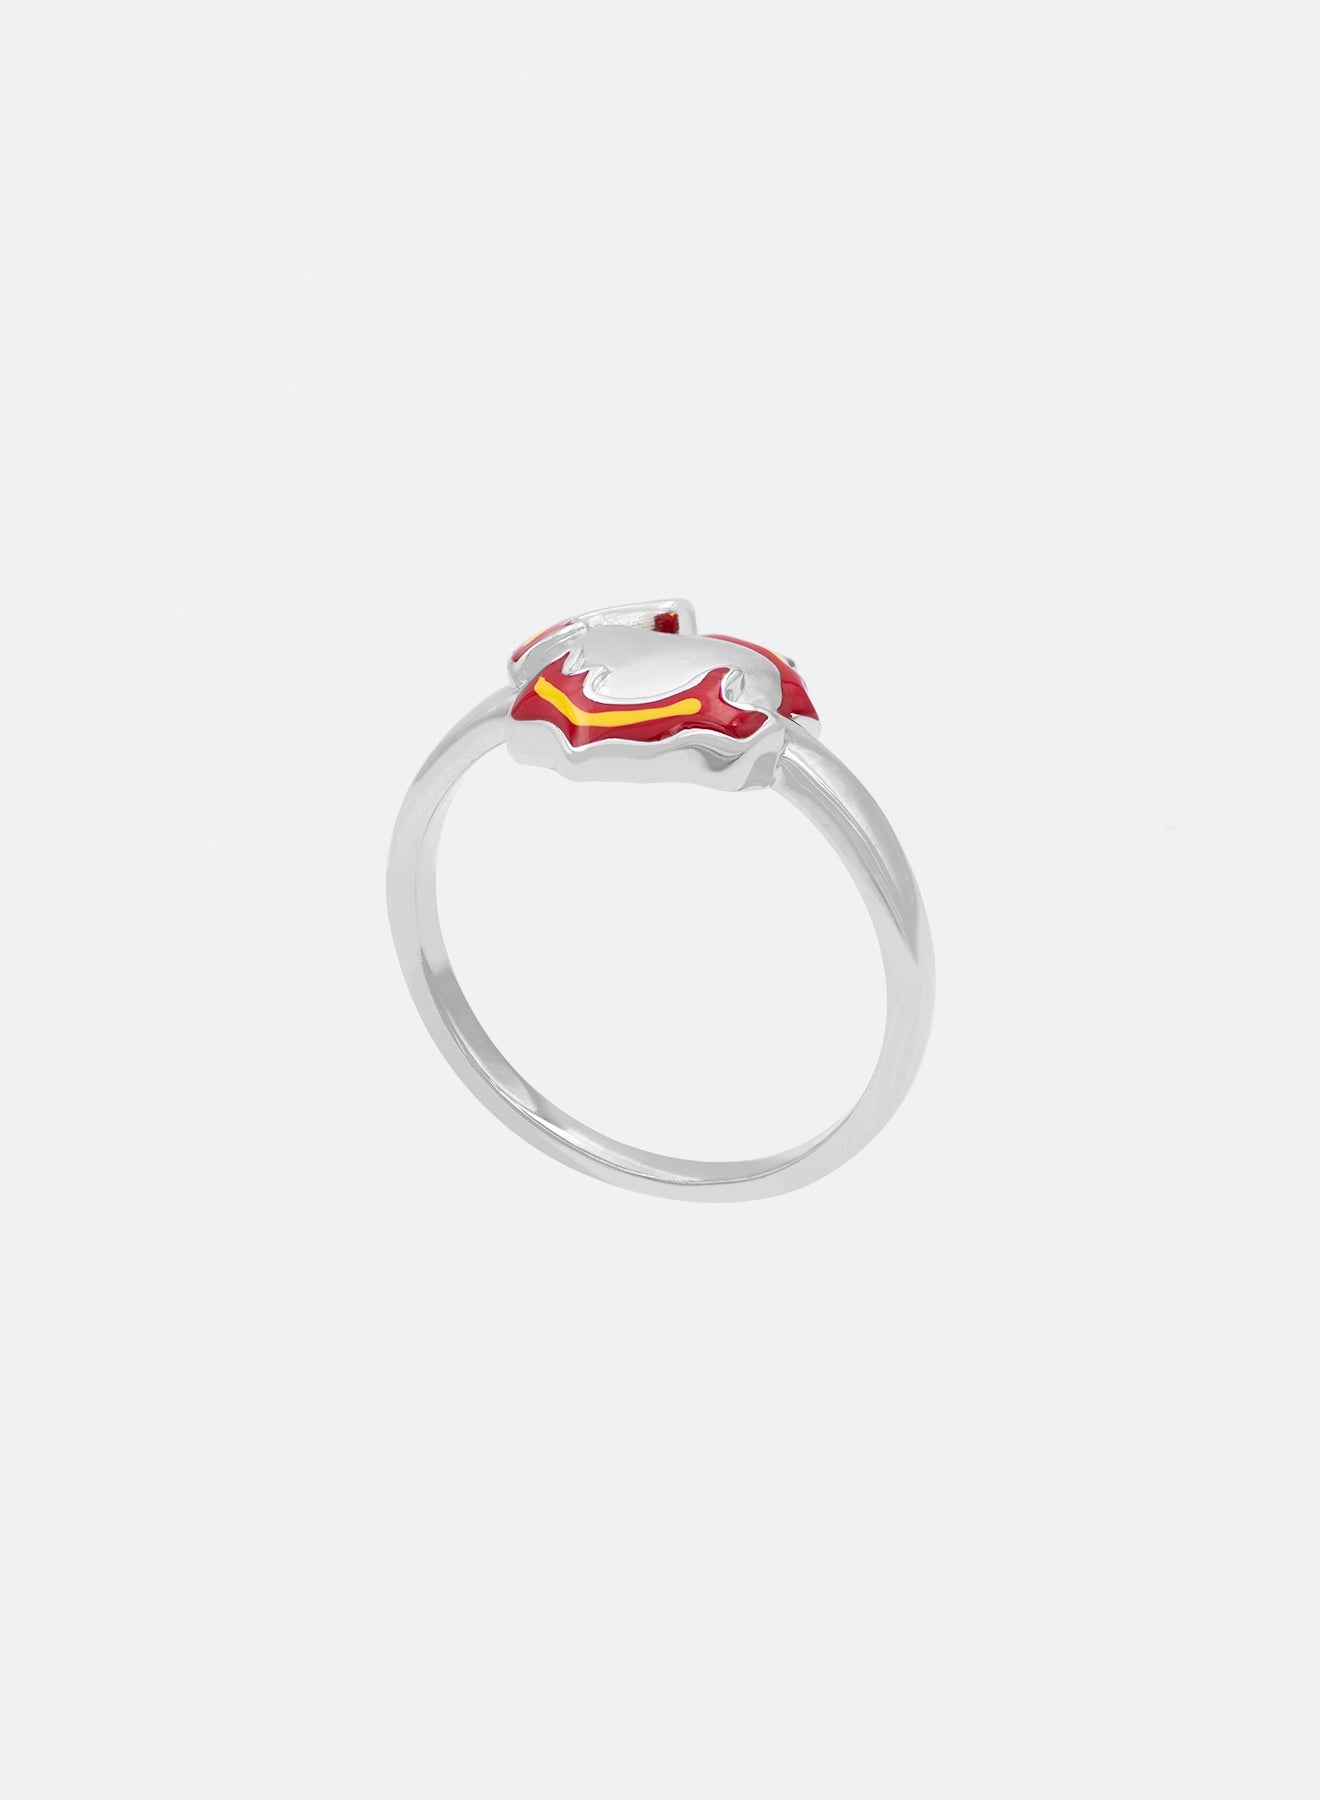 white gold coated heart ring with red-yellow hand painted enamel